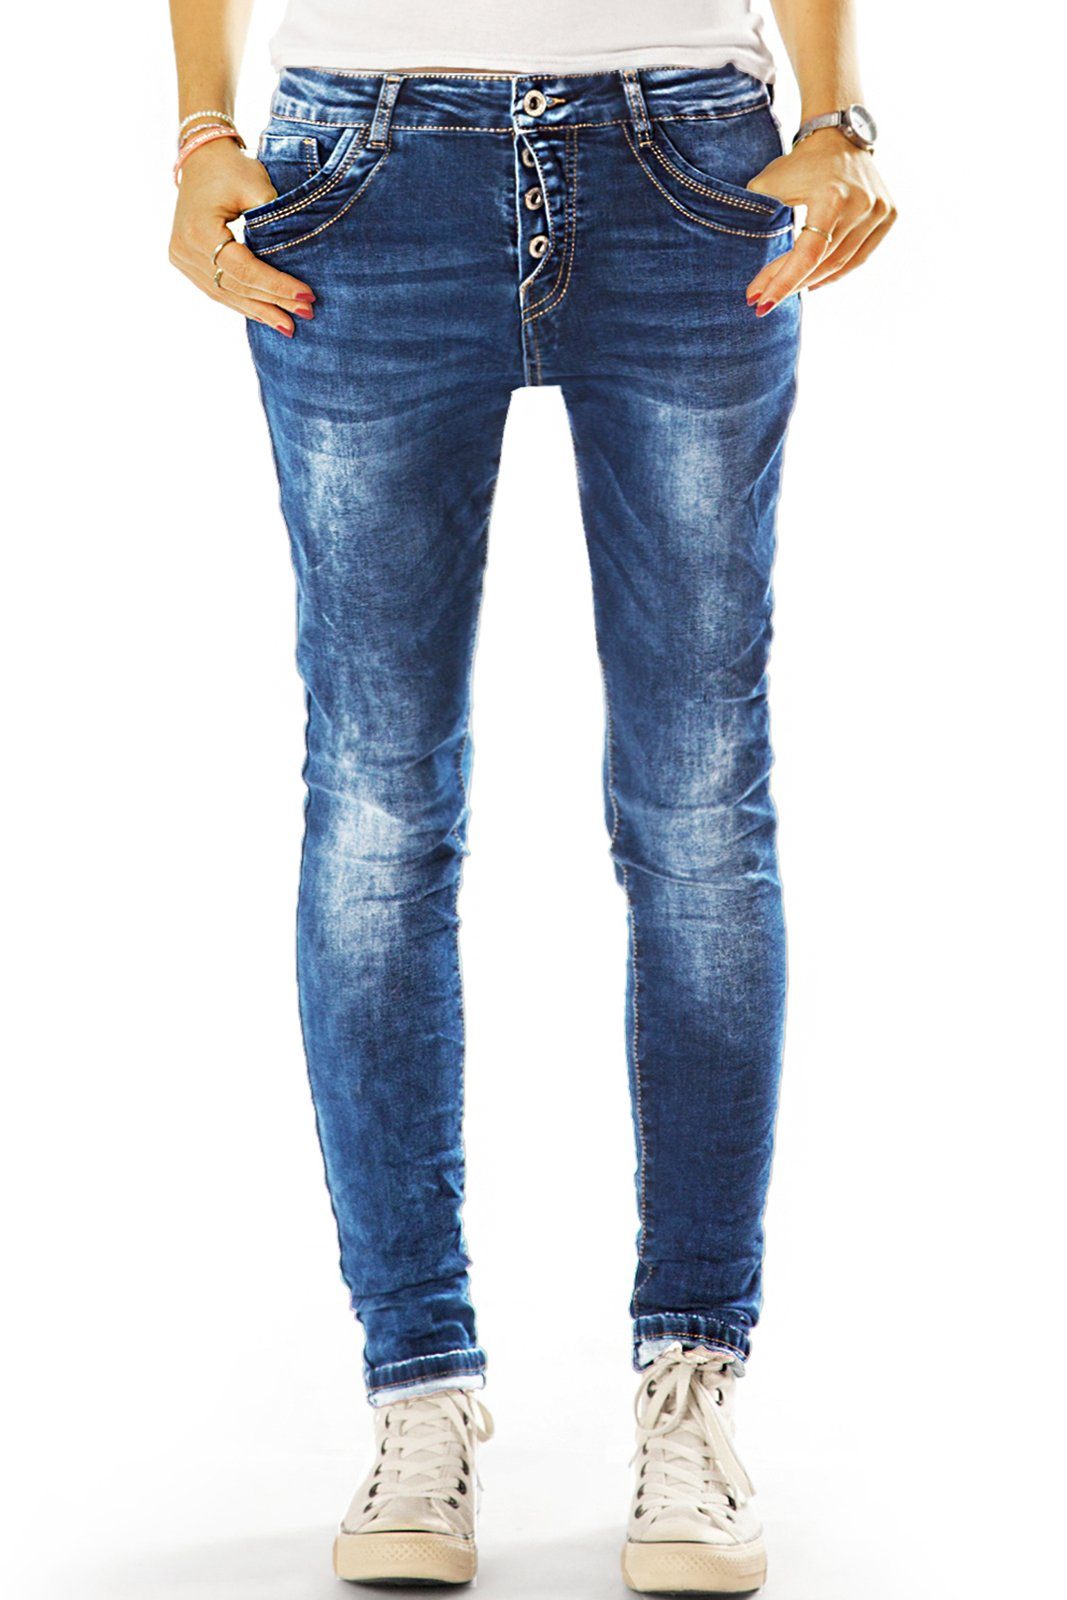 Damen Hüftjeans Look Relaxed mit - im Hose 5-Pocket-Style - Fit styled be Fit Slim-fit-Jeans Slim Stretch-Anteil, j4g-1